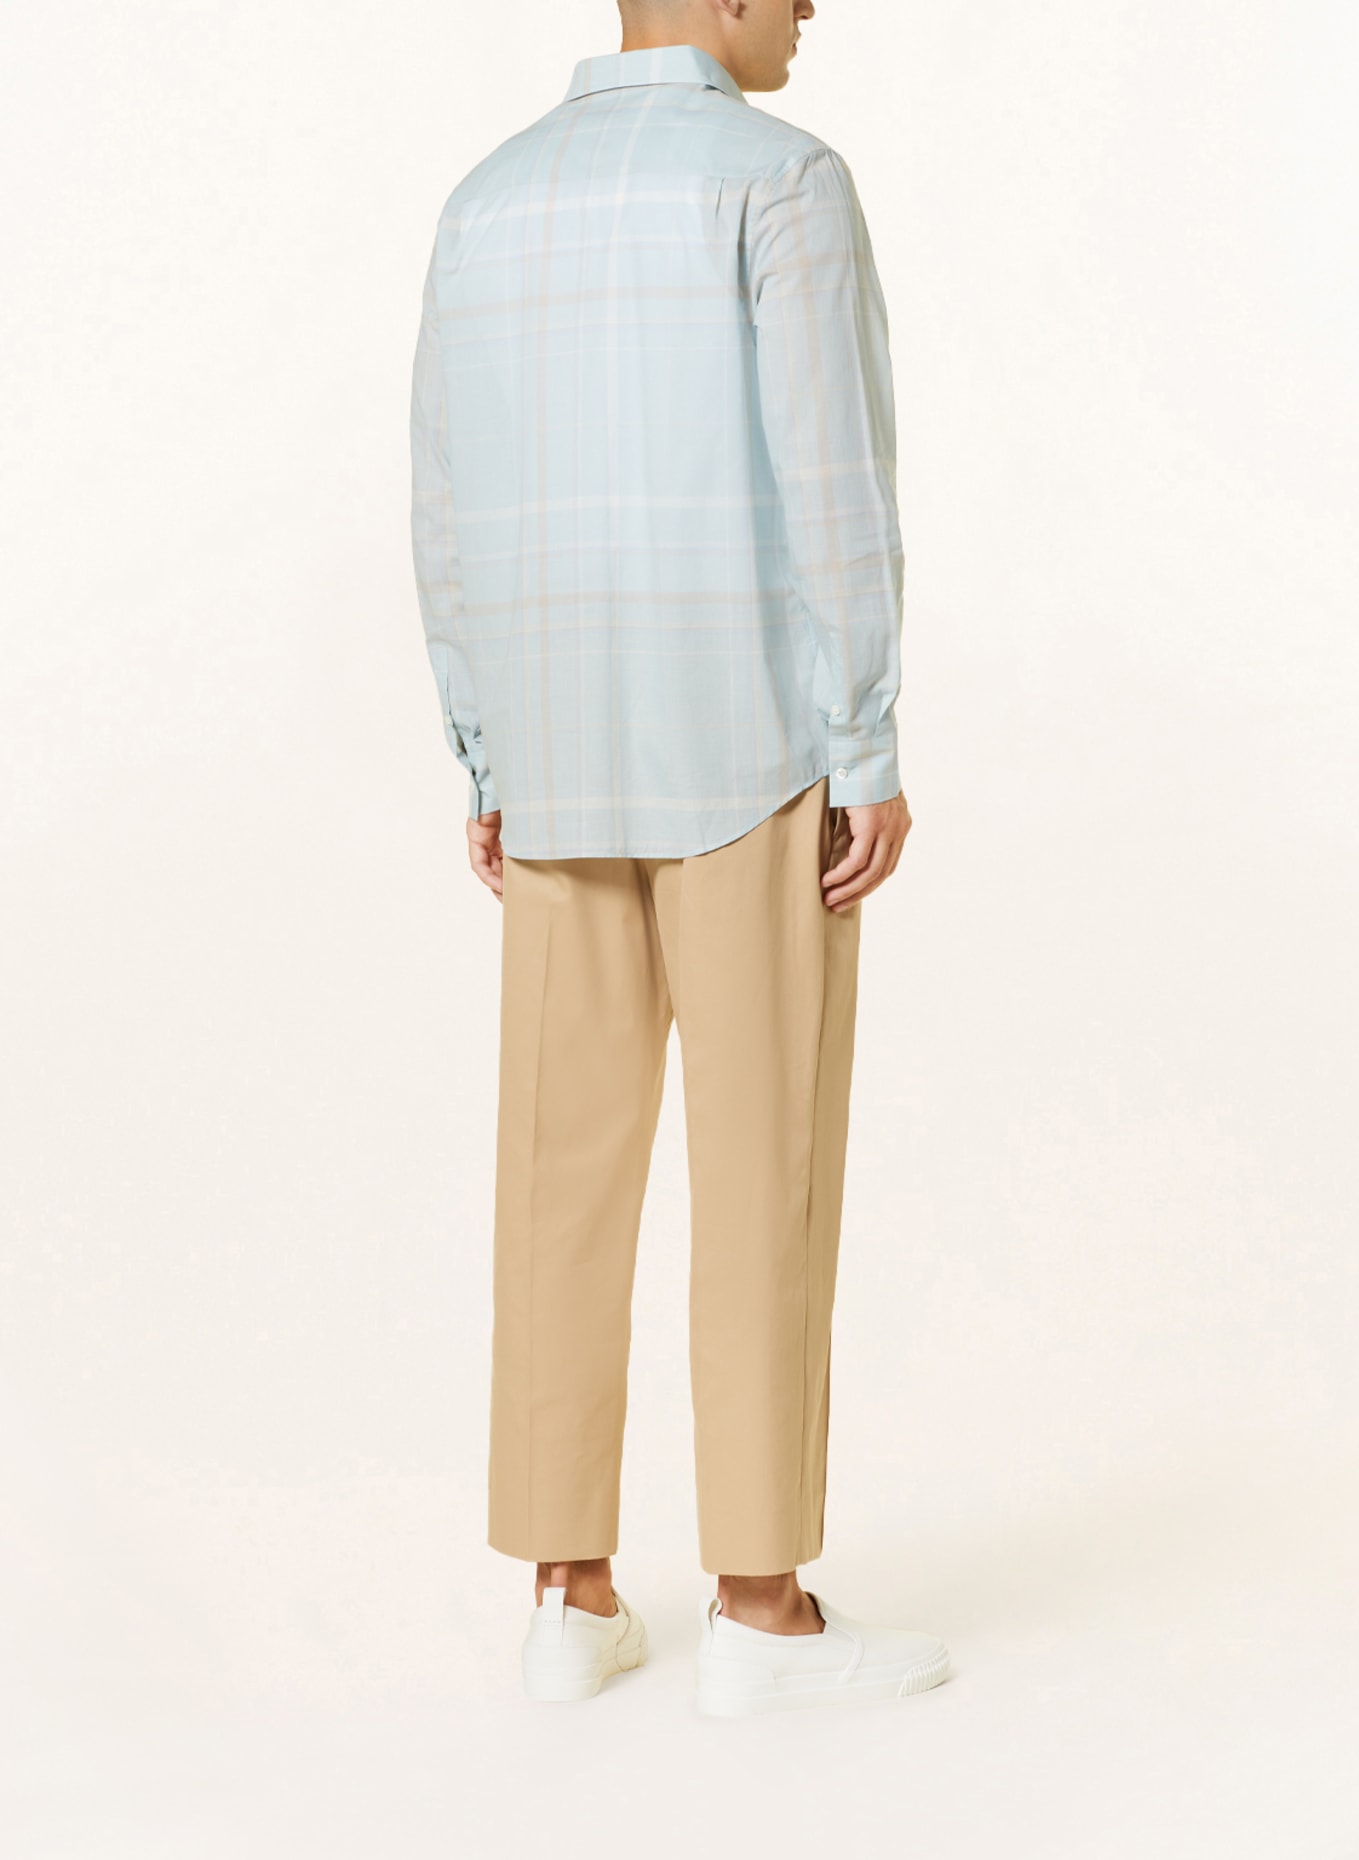 COS Shirt JAMES relaxed fit, Color: LIGHT BLUE/ WHITE/ LIGHT BROWN (Image 3)